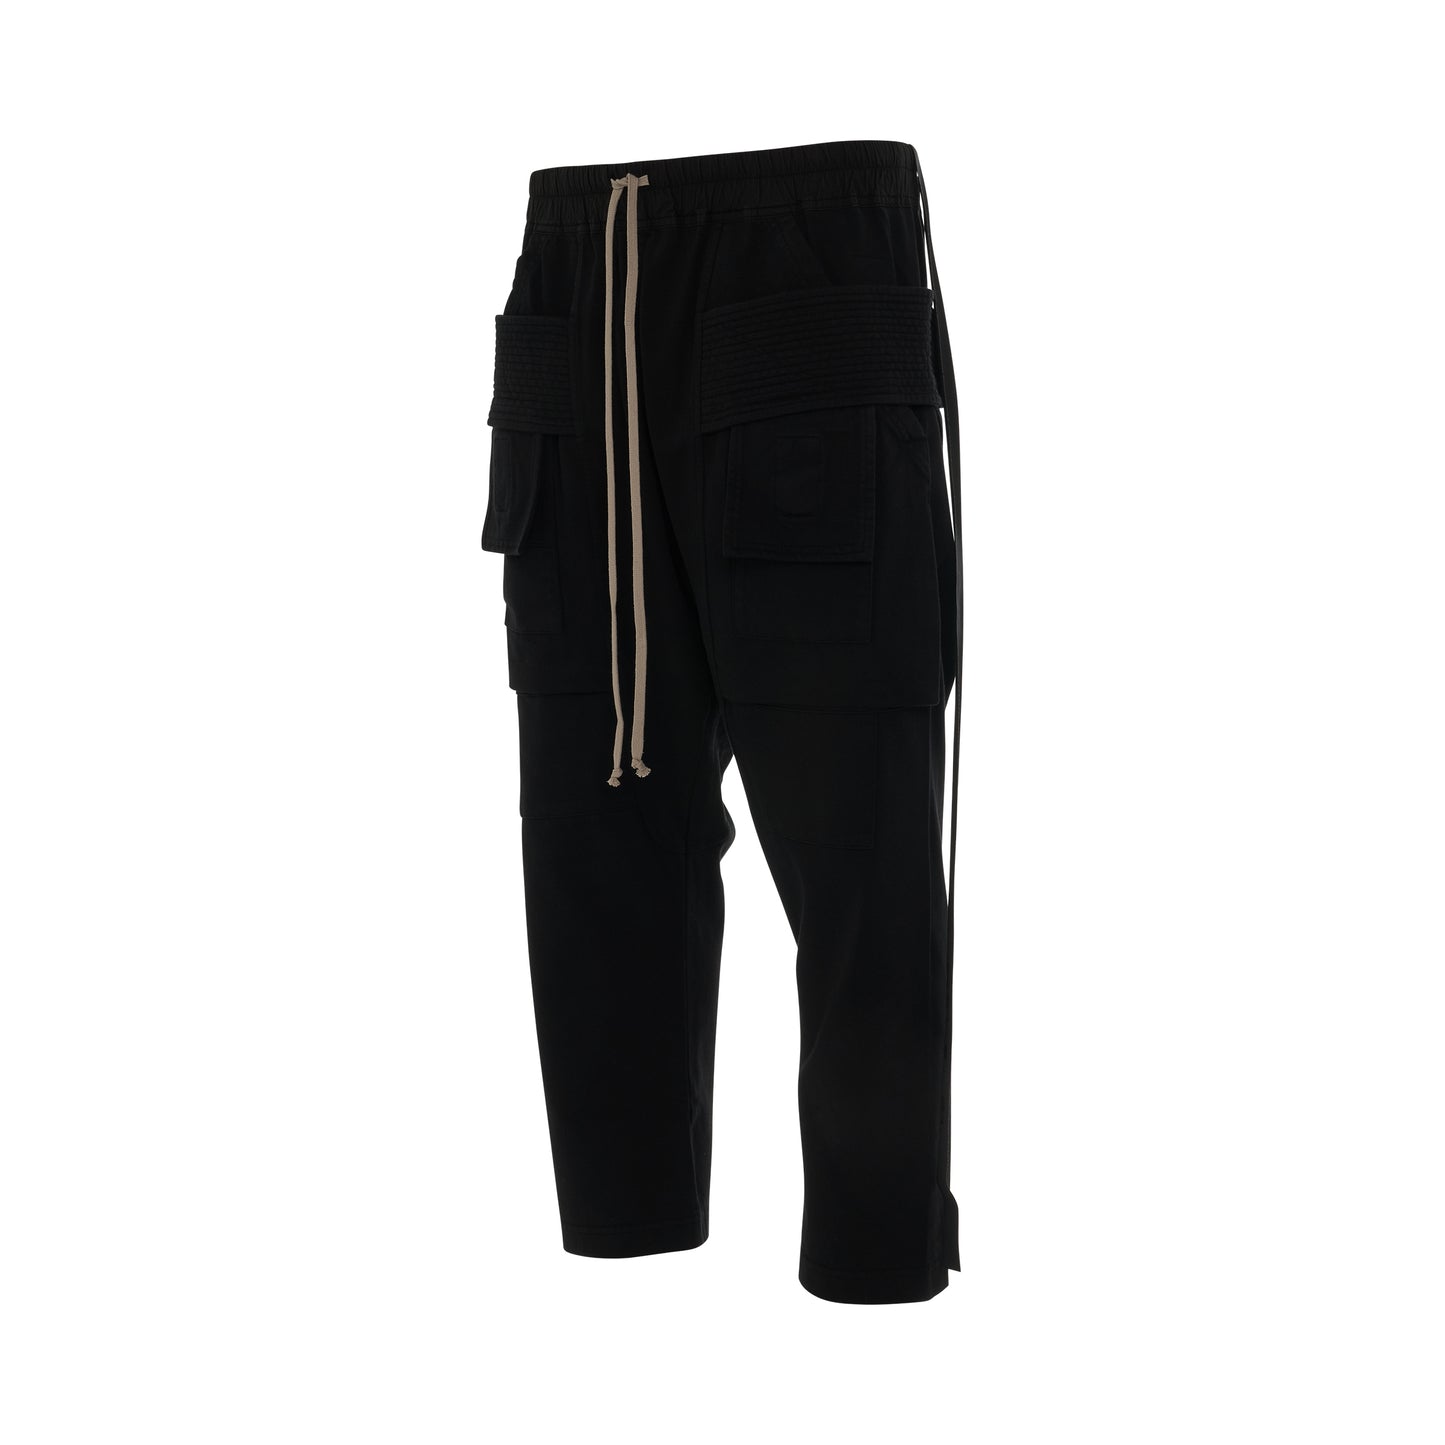 DRKSHDW Creatch Cargo Cropped Drawstring Pants in Black